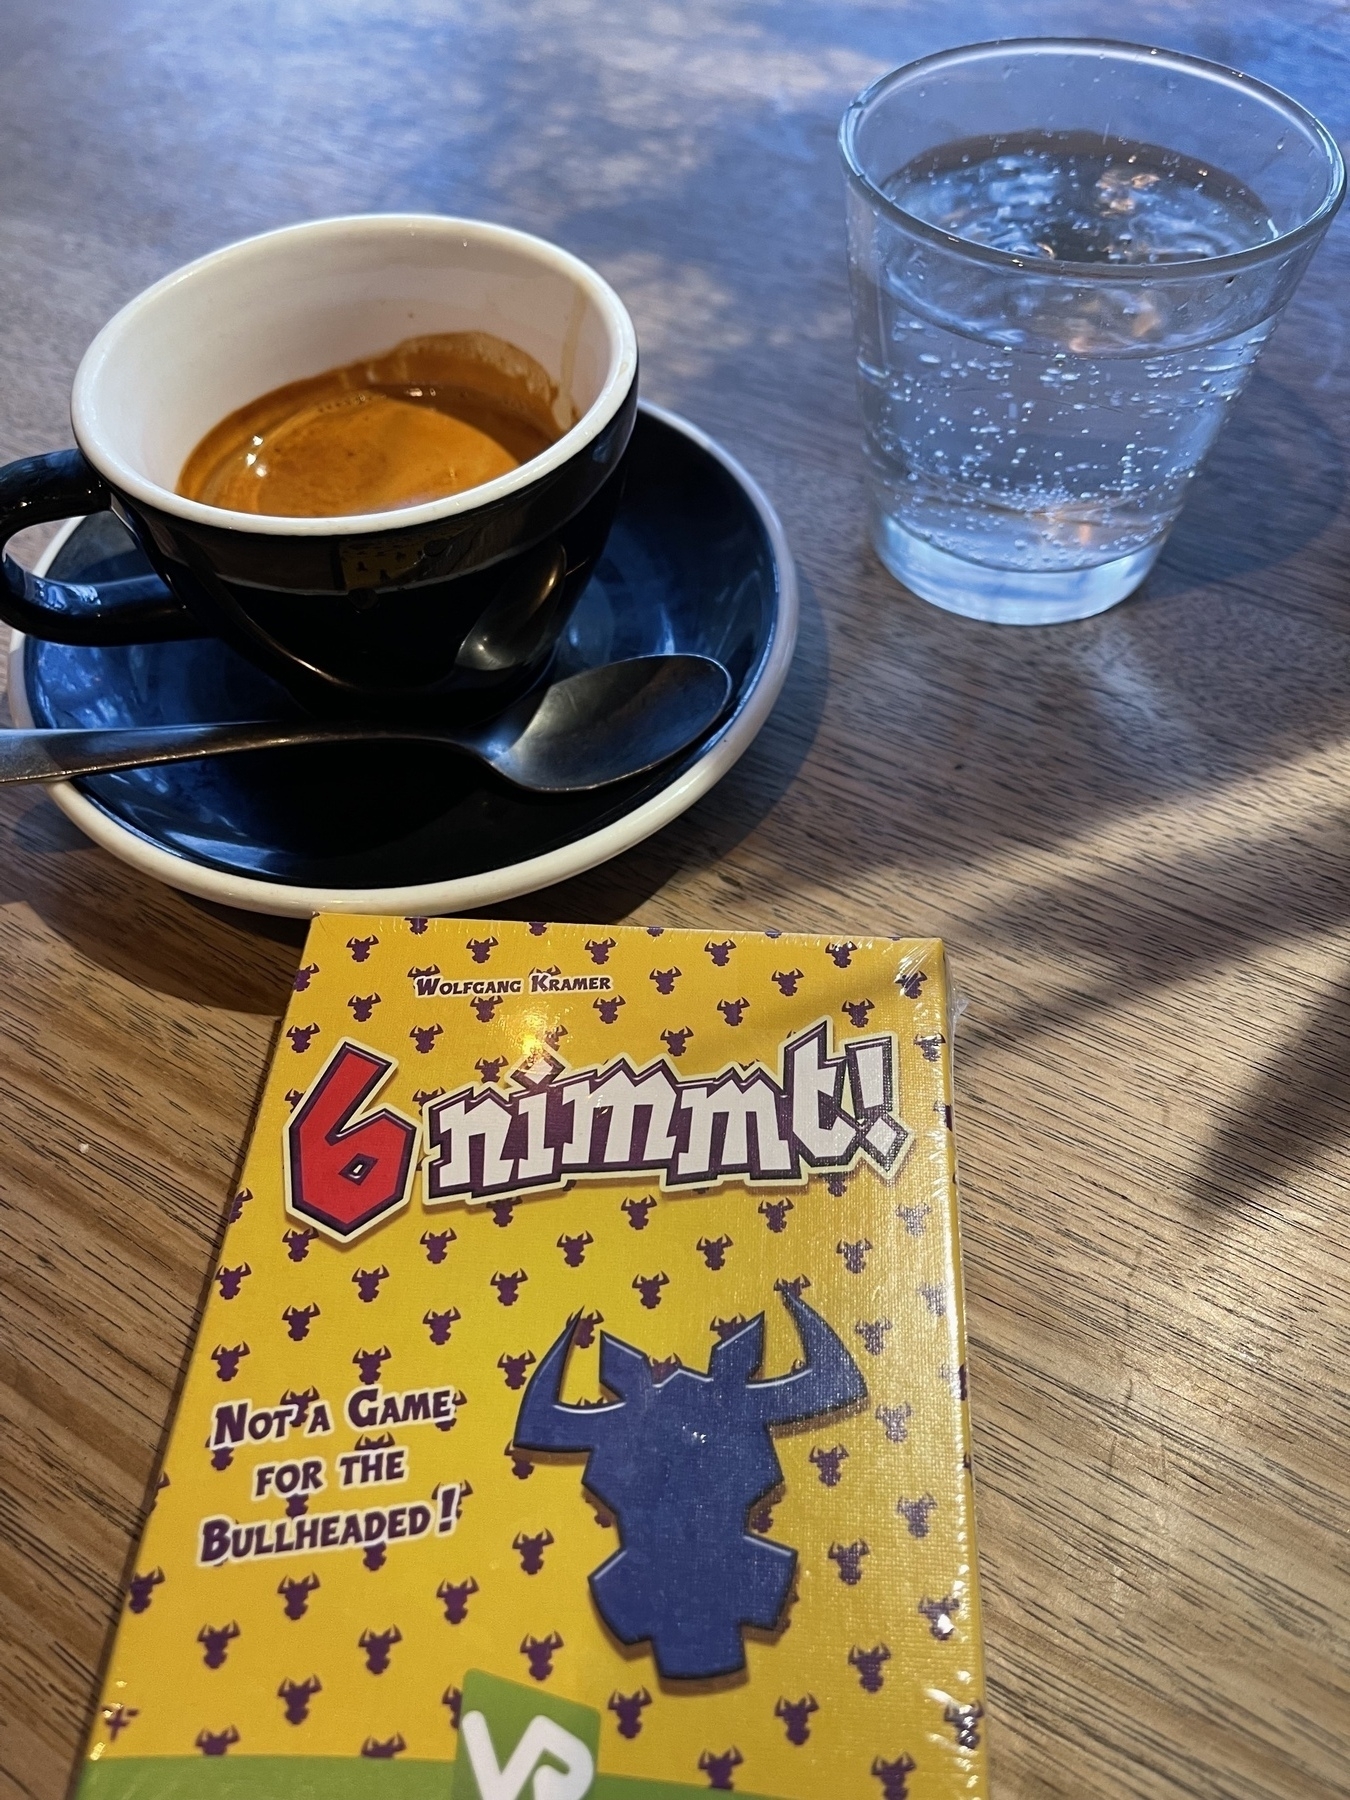 In the foreground a box of ‘6 nimmt’ (Take 6) card game and in the background espresso coffee in a blue cup and saucer and a small glass of sparkling water.